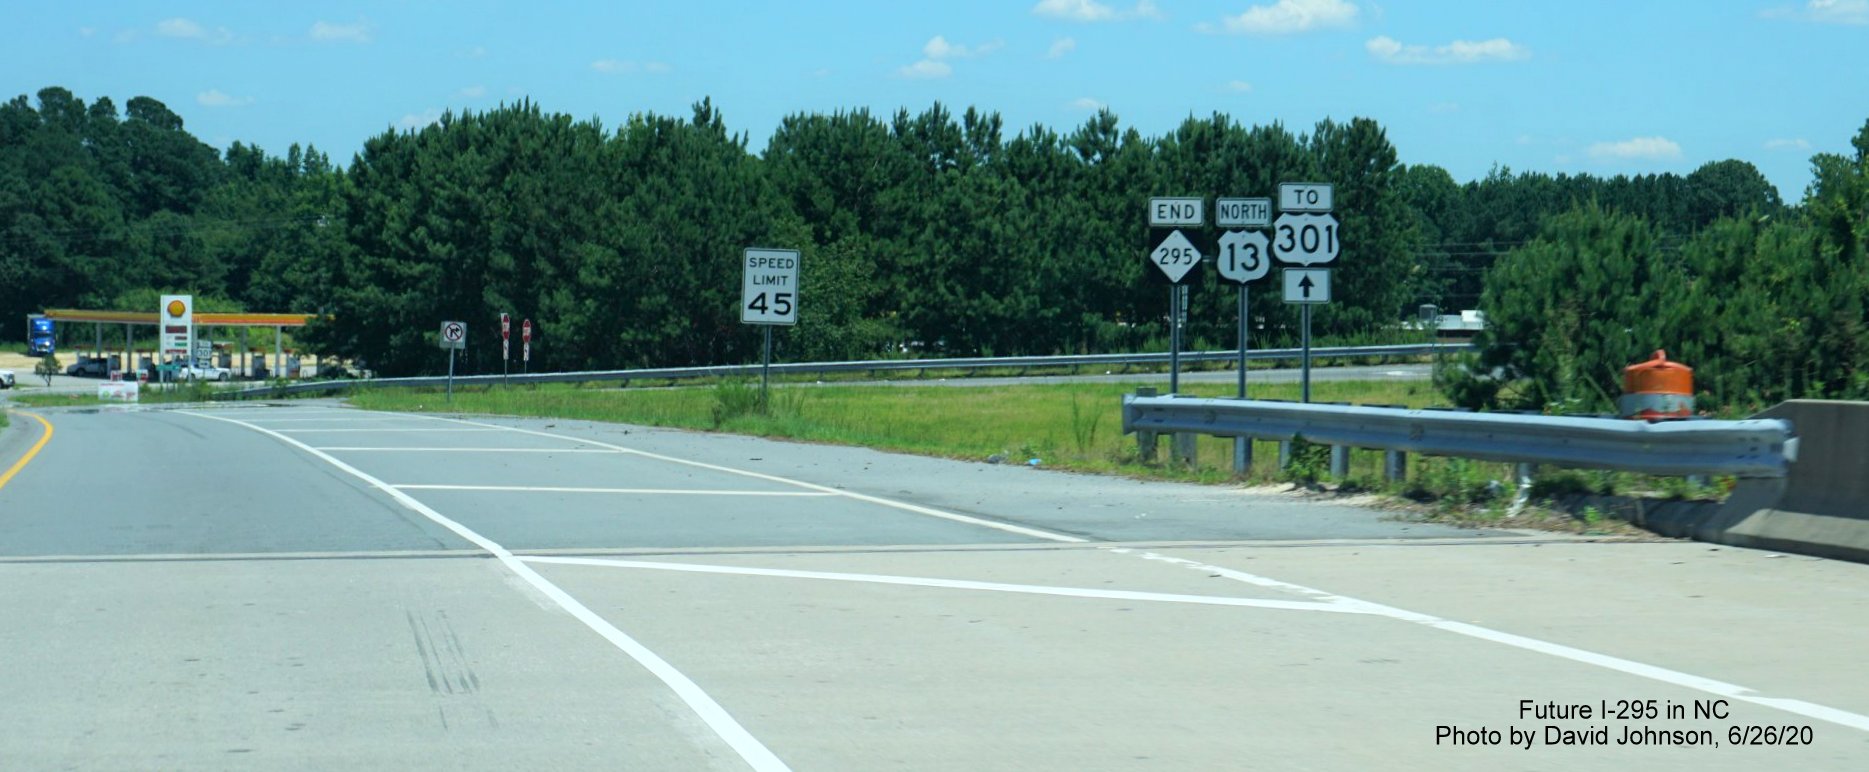 Image of end NC 295 trailblazer at beginning of US 13 after I-95 exit ramp at end of I-295 North, by David Johnson June 2020